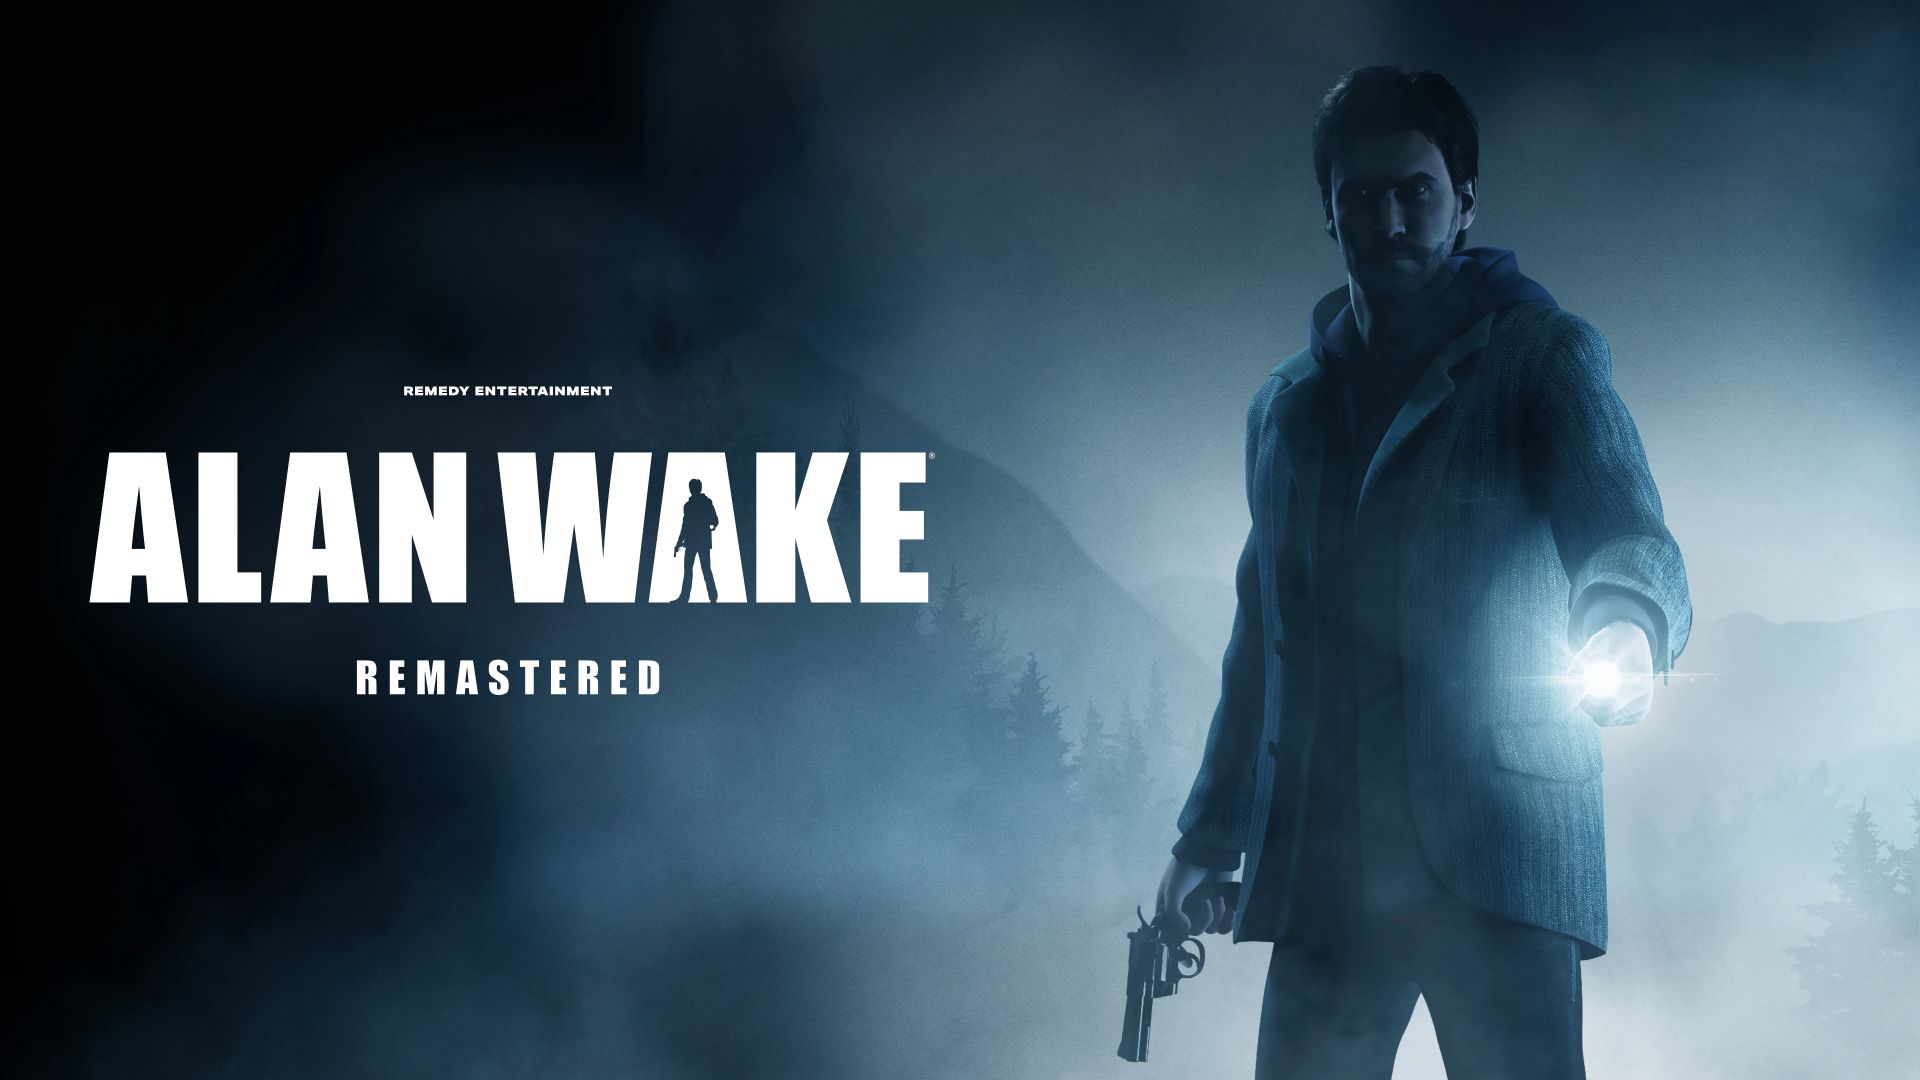 Alan Wake Remastered Gameplay Footage Showcases Early Section in 4K